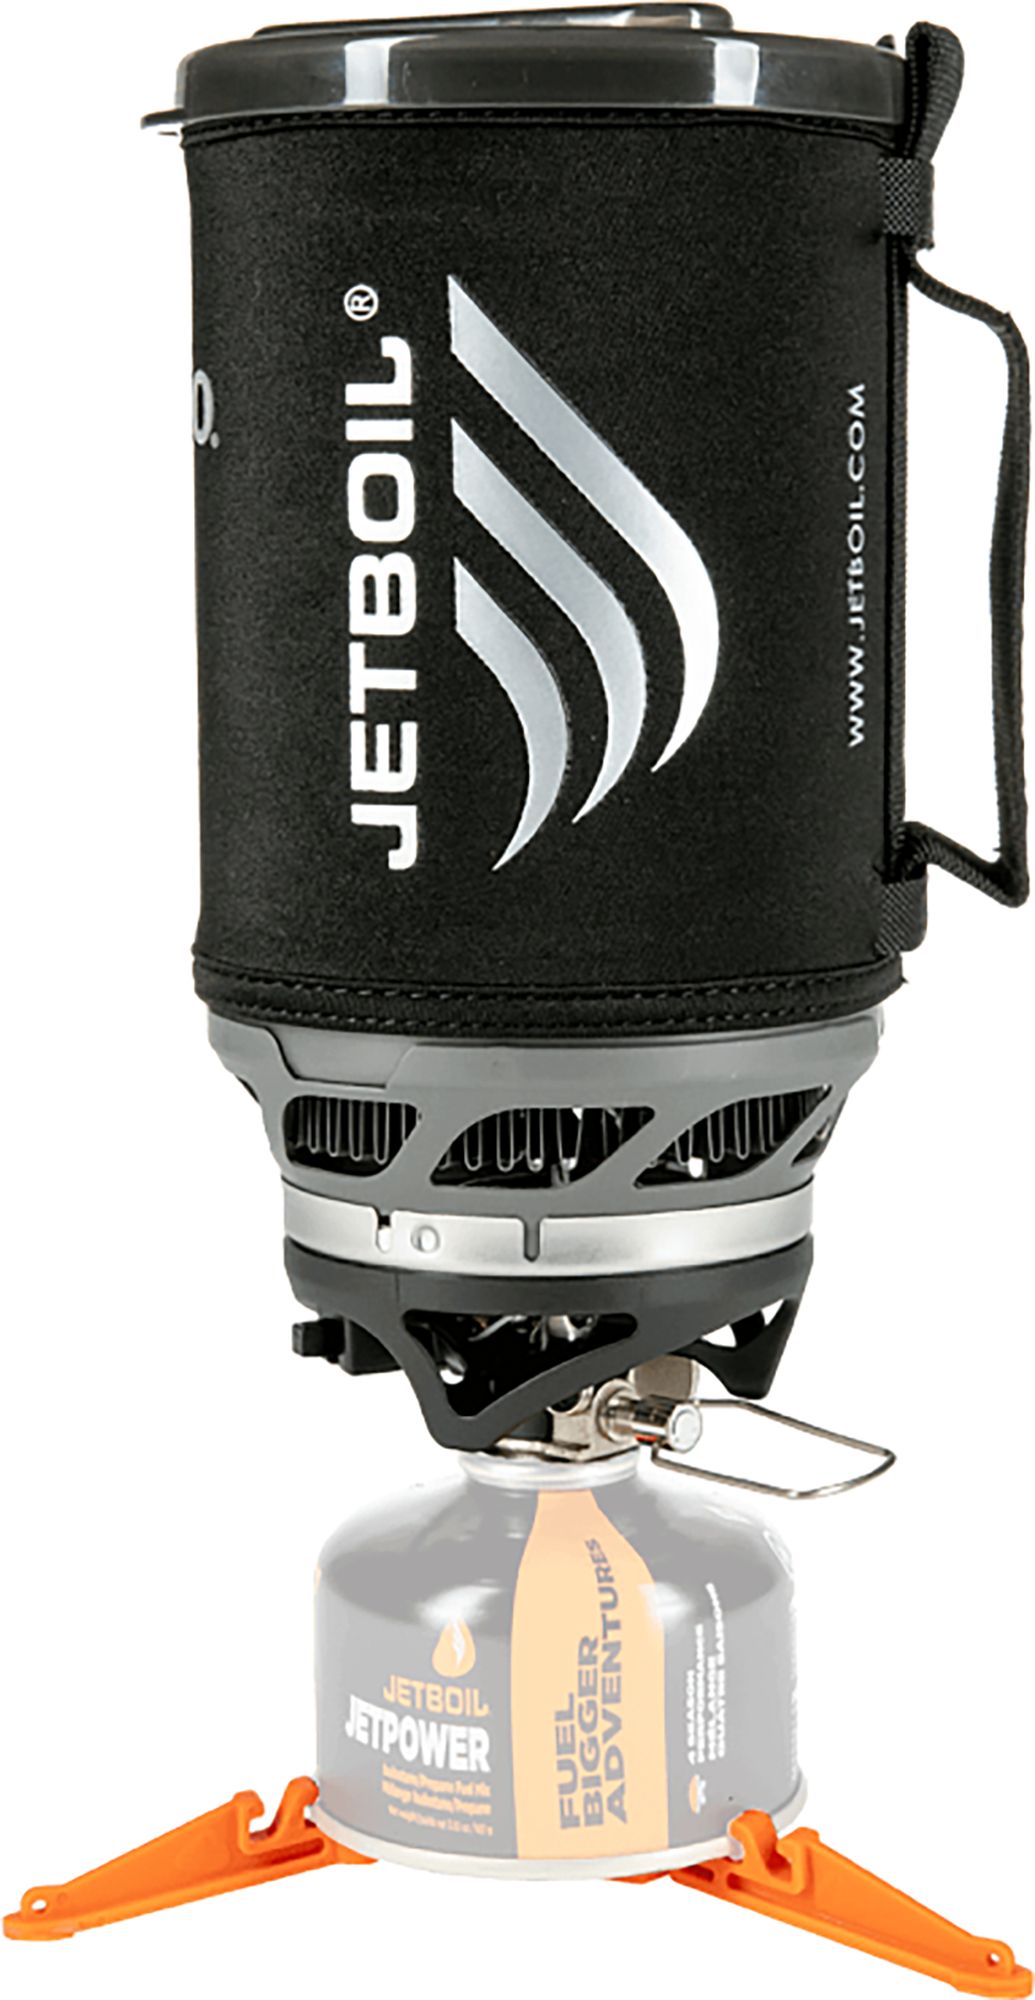 Jetboil SUMO Carbon Cooking System